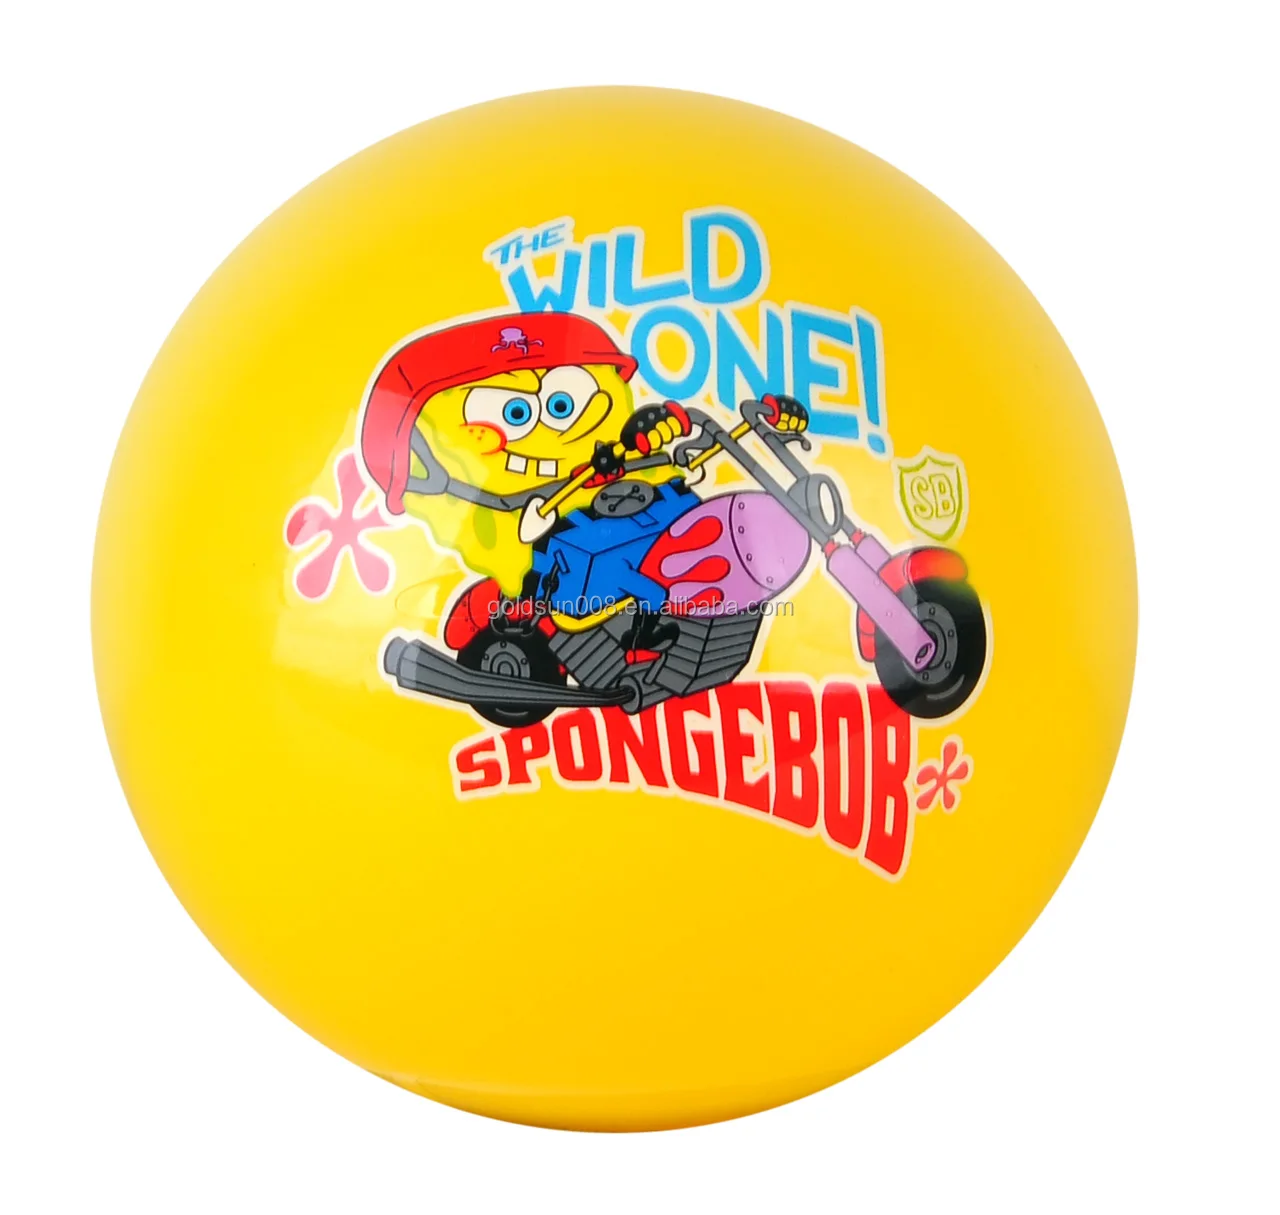 Customized Printed Kids Inflatable Play Ball PVC Sport Ball for Students Kindergarten